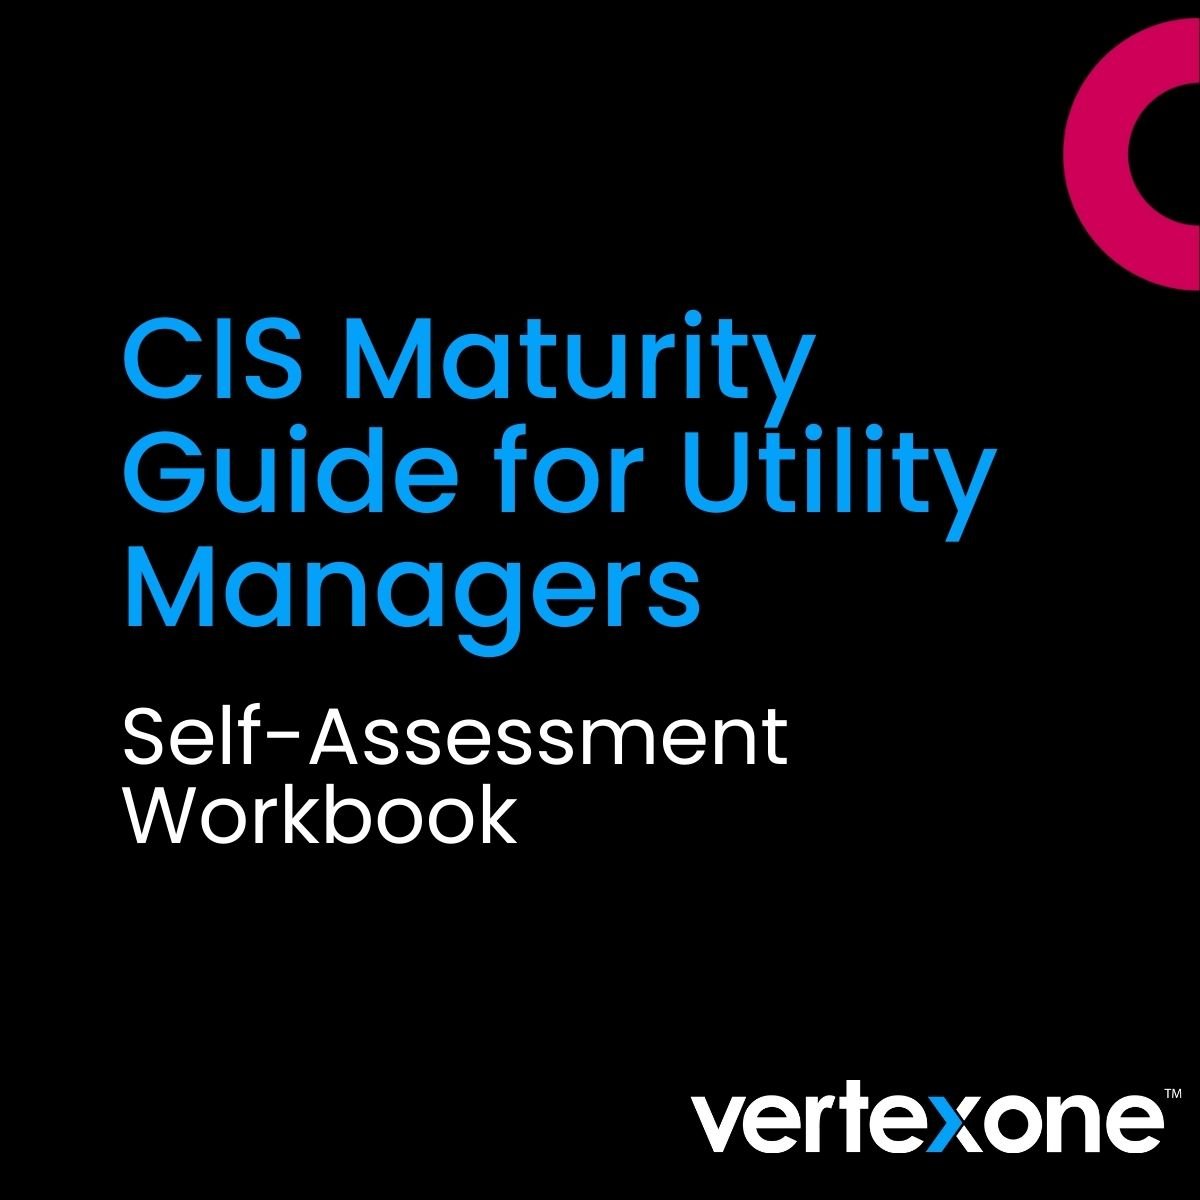 CIS Maturity Guide for Utility Managers Self-Assessment Workbook